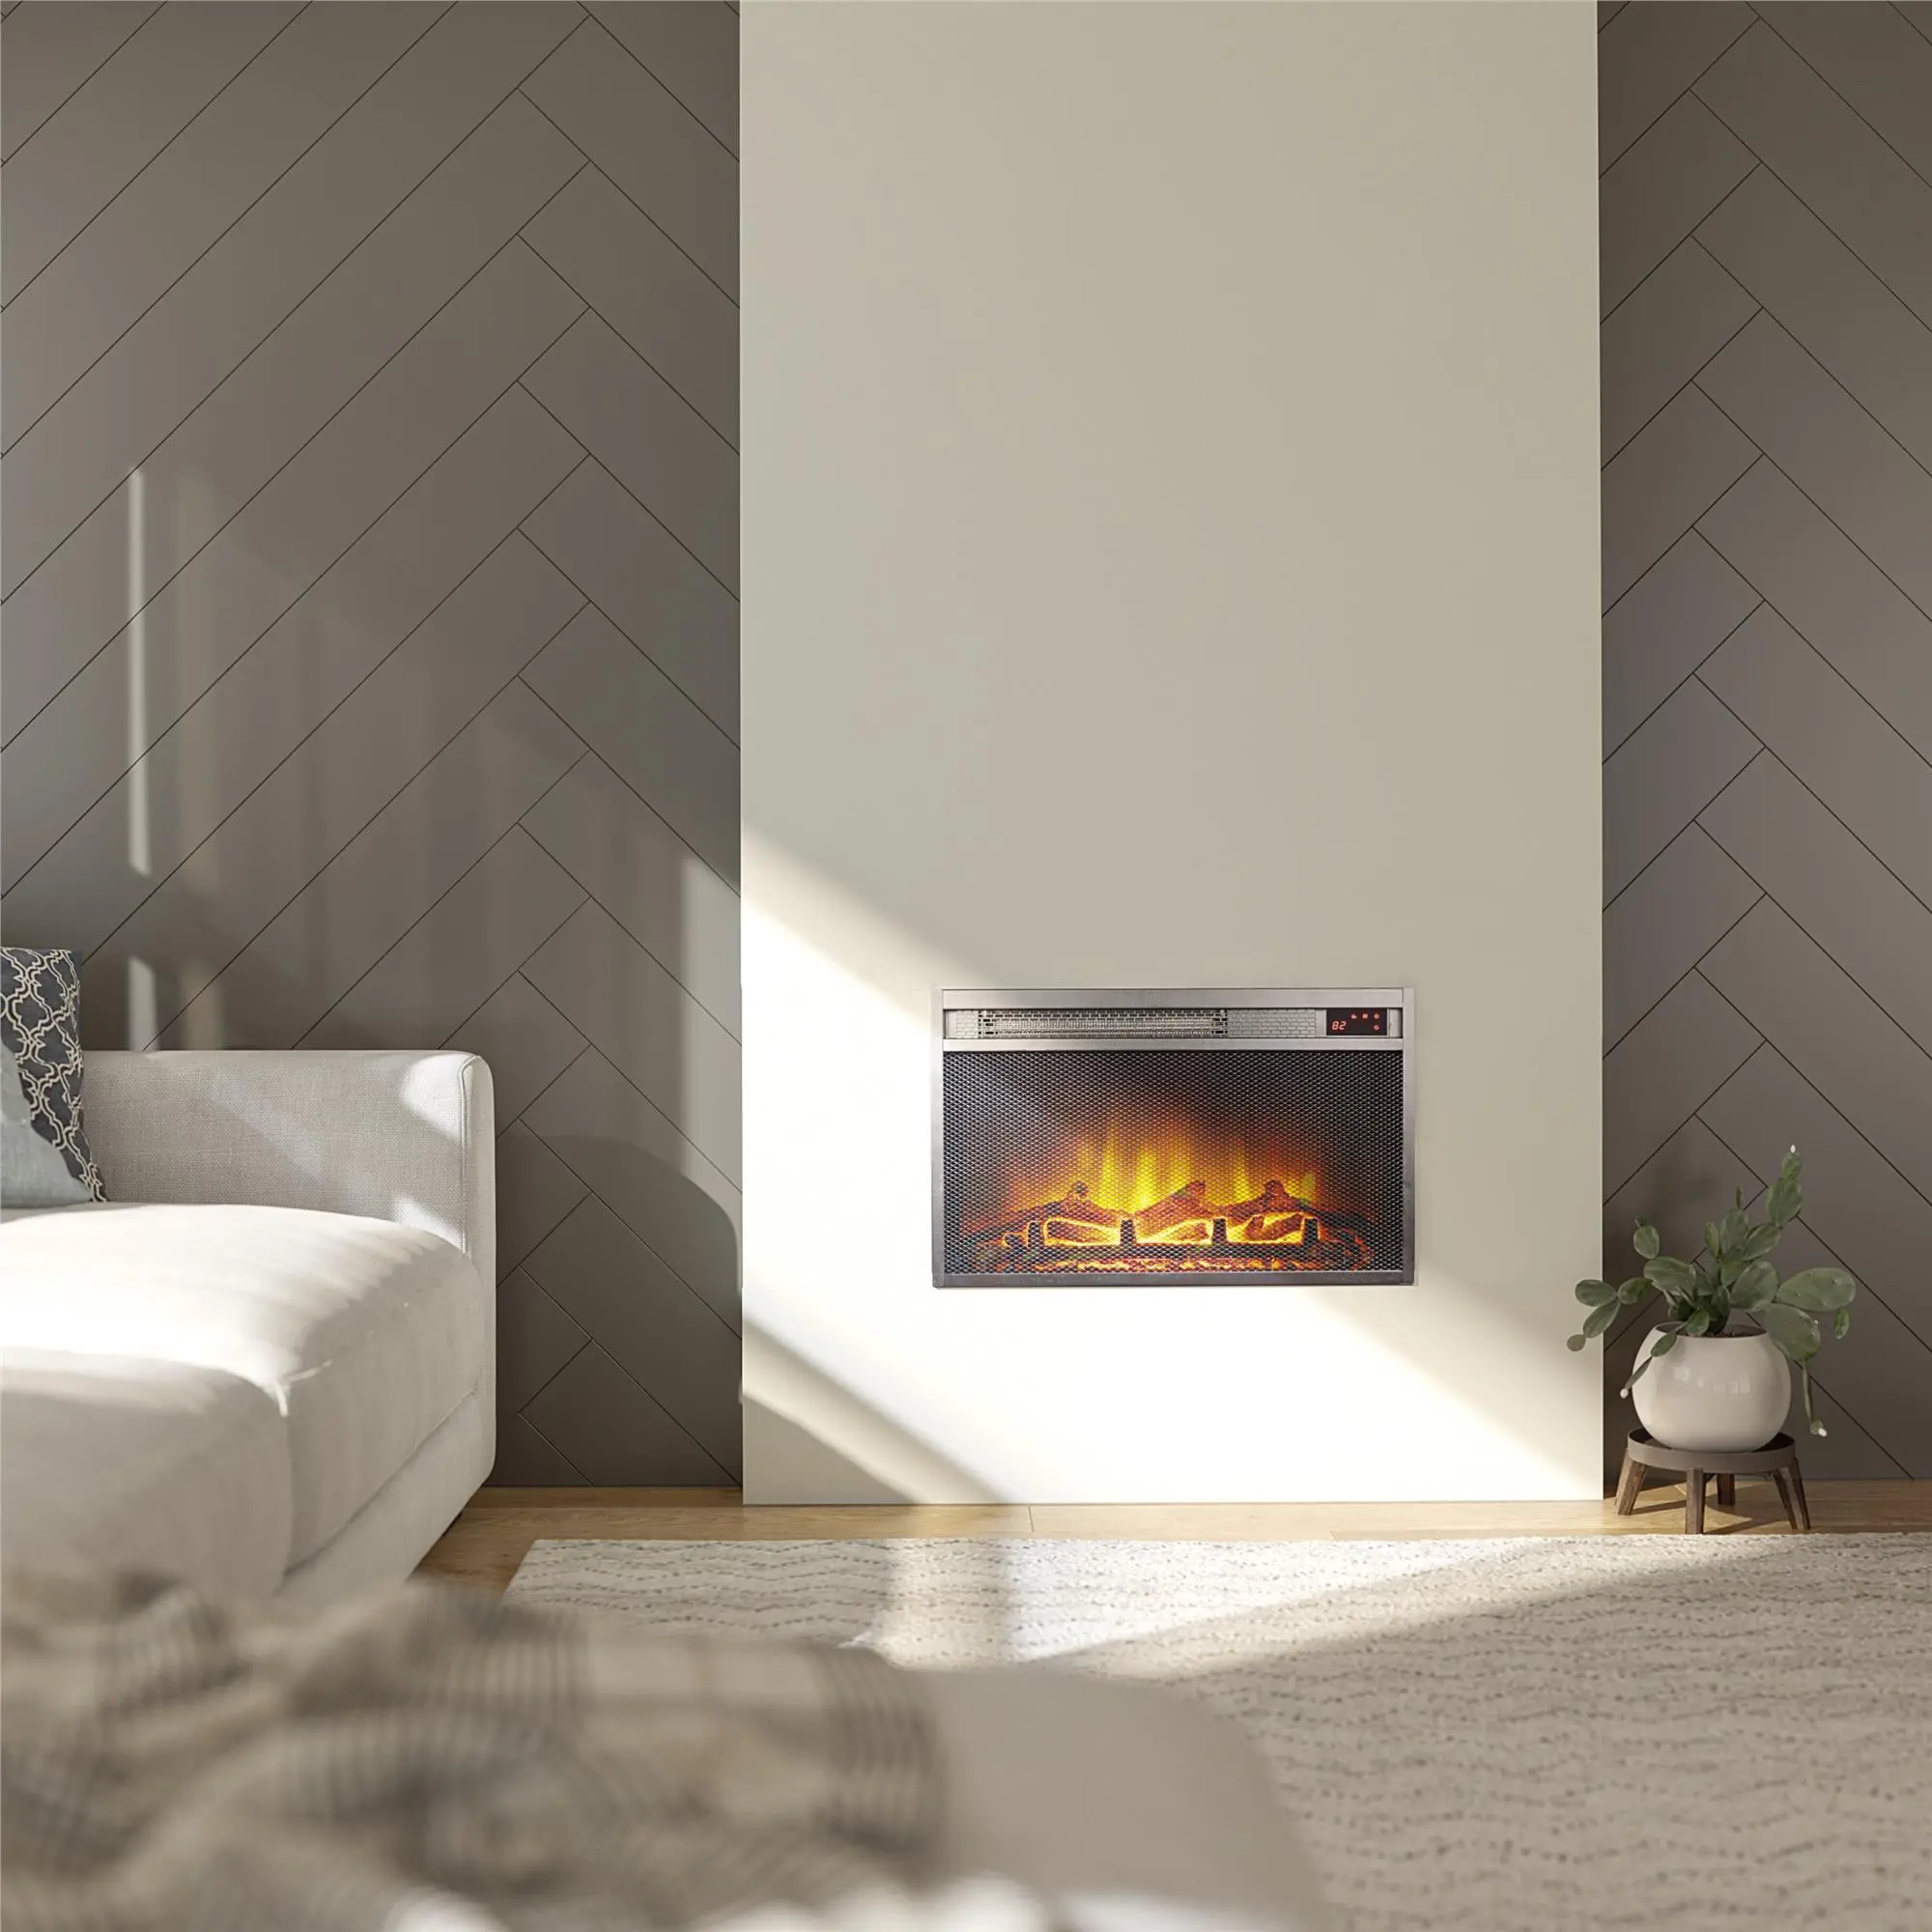 Altra Flame Black 23 x 14 Electric Fireplace Insert...